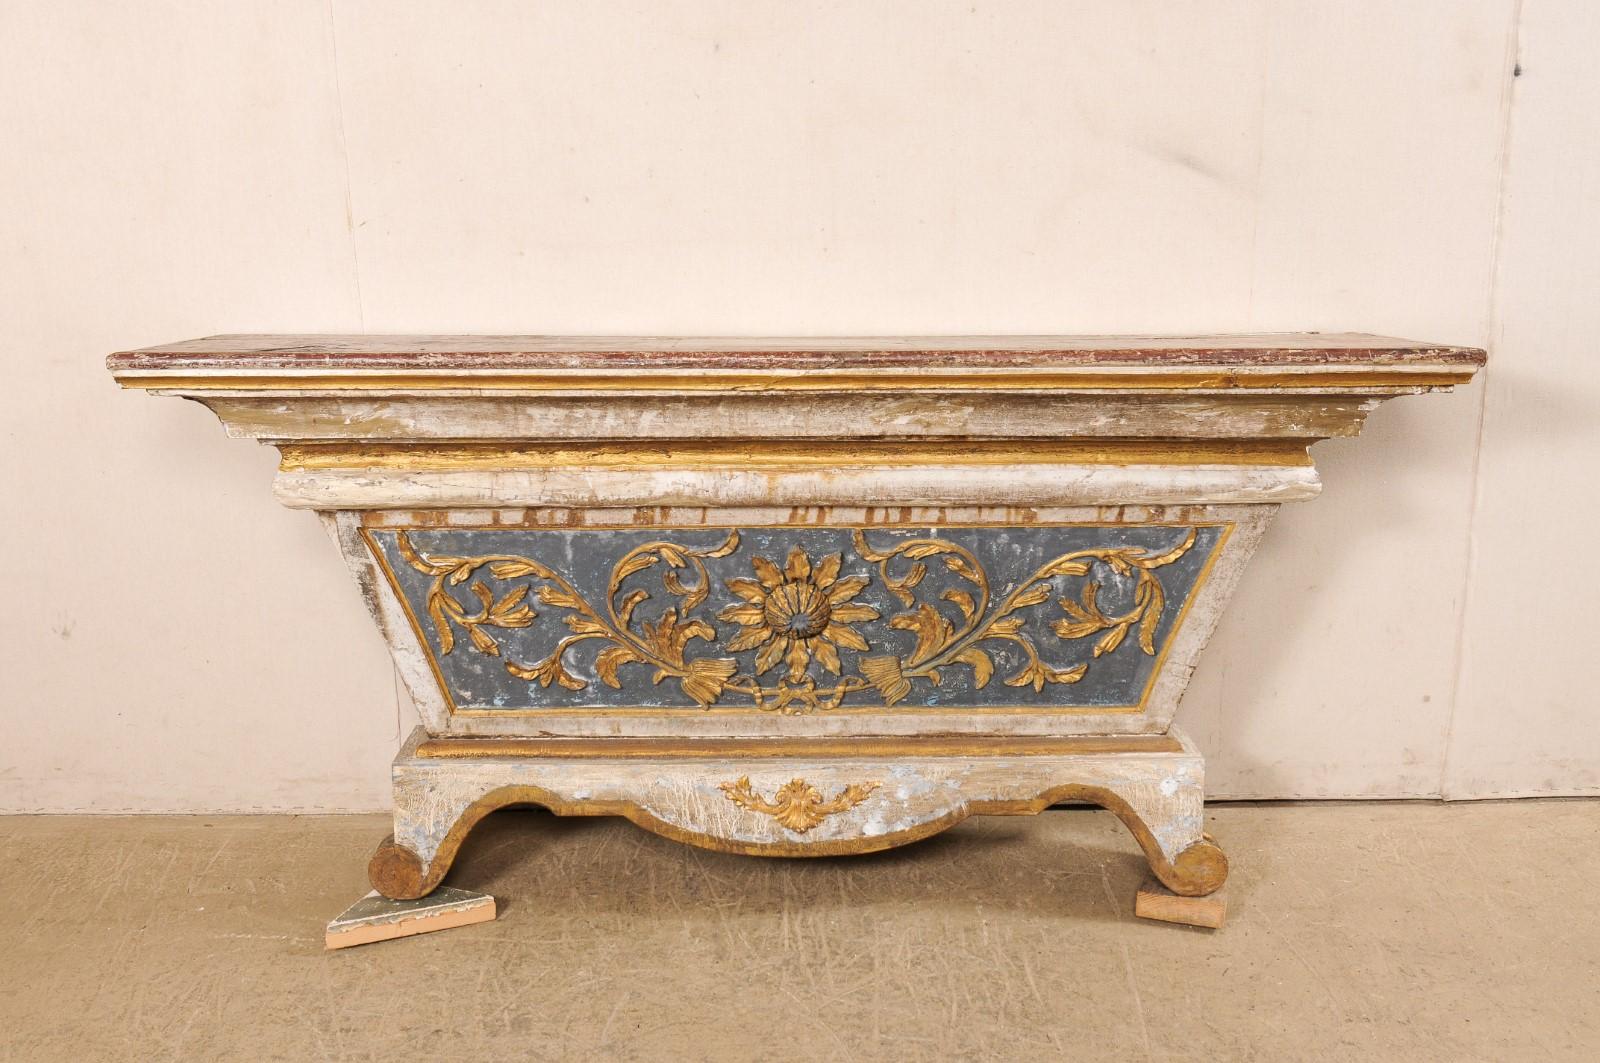 An Italian carved and painted altar from the 18th century, which we envision making a fabulous wall-mounted console table! This antique table from Italy, once used as an alter, has a trapezoidal shape with good-sized top that spans just over six